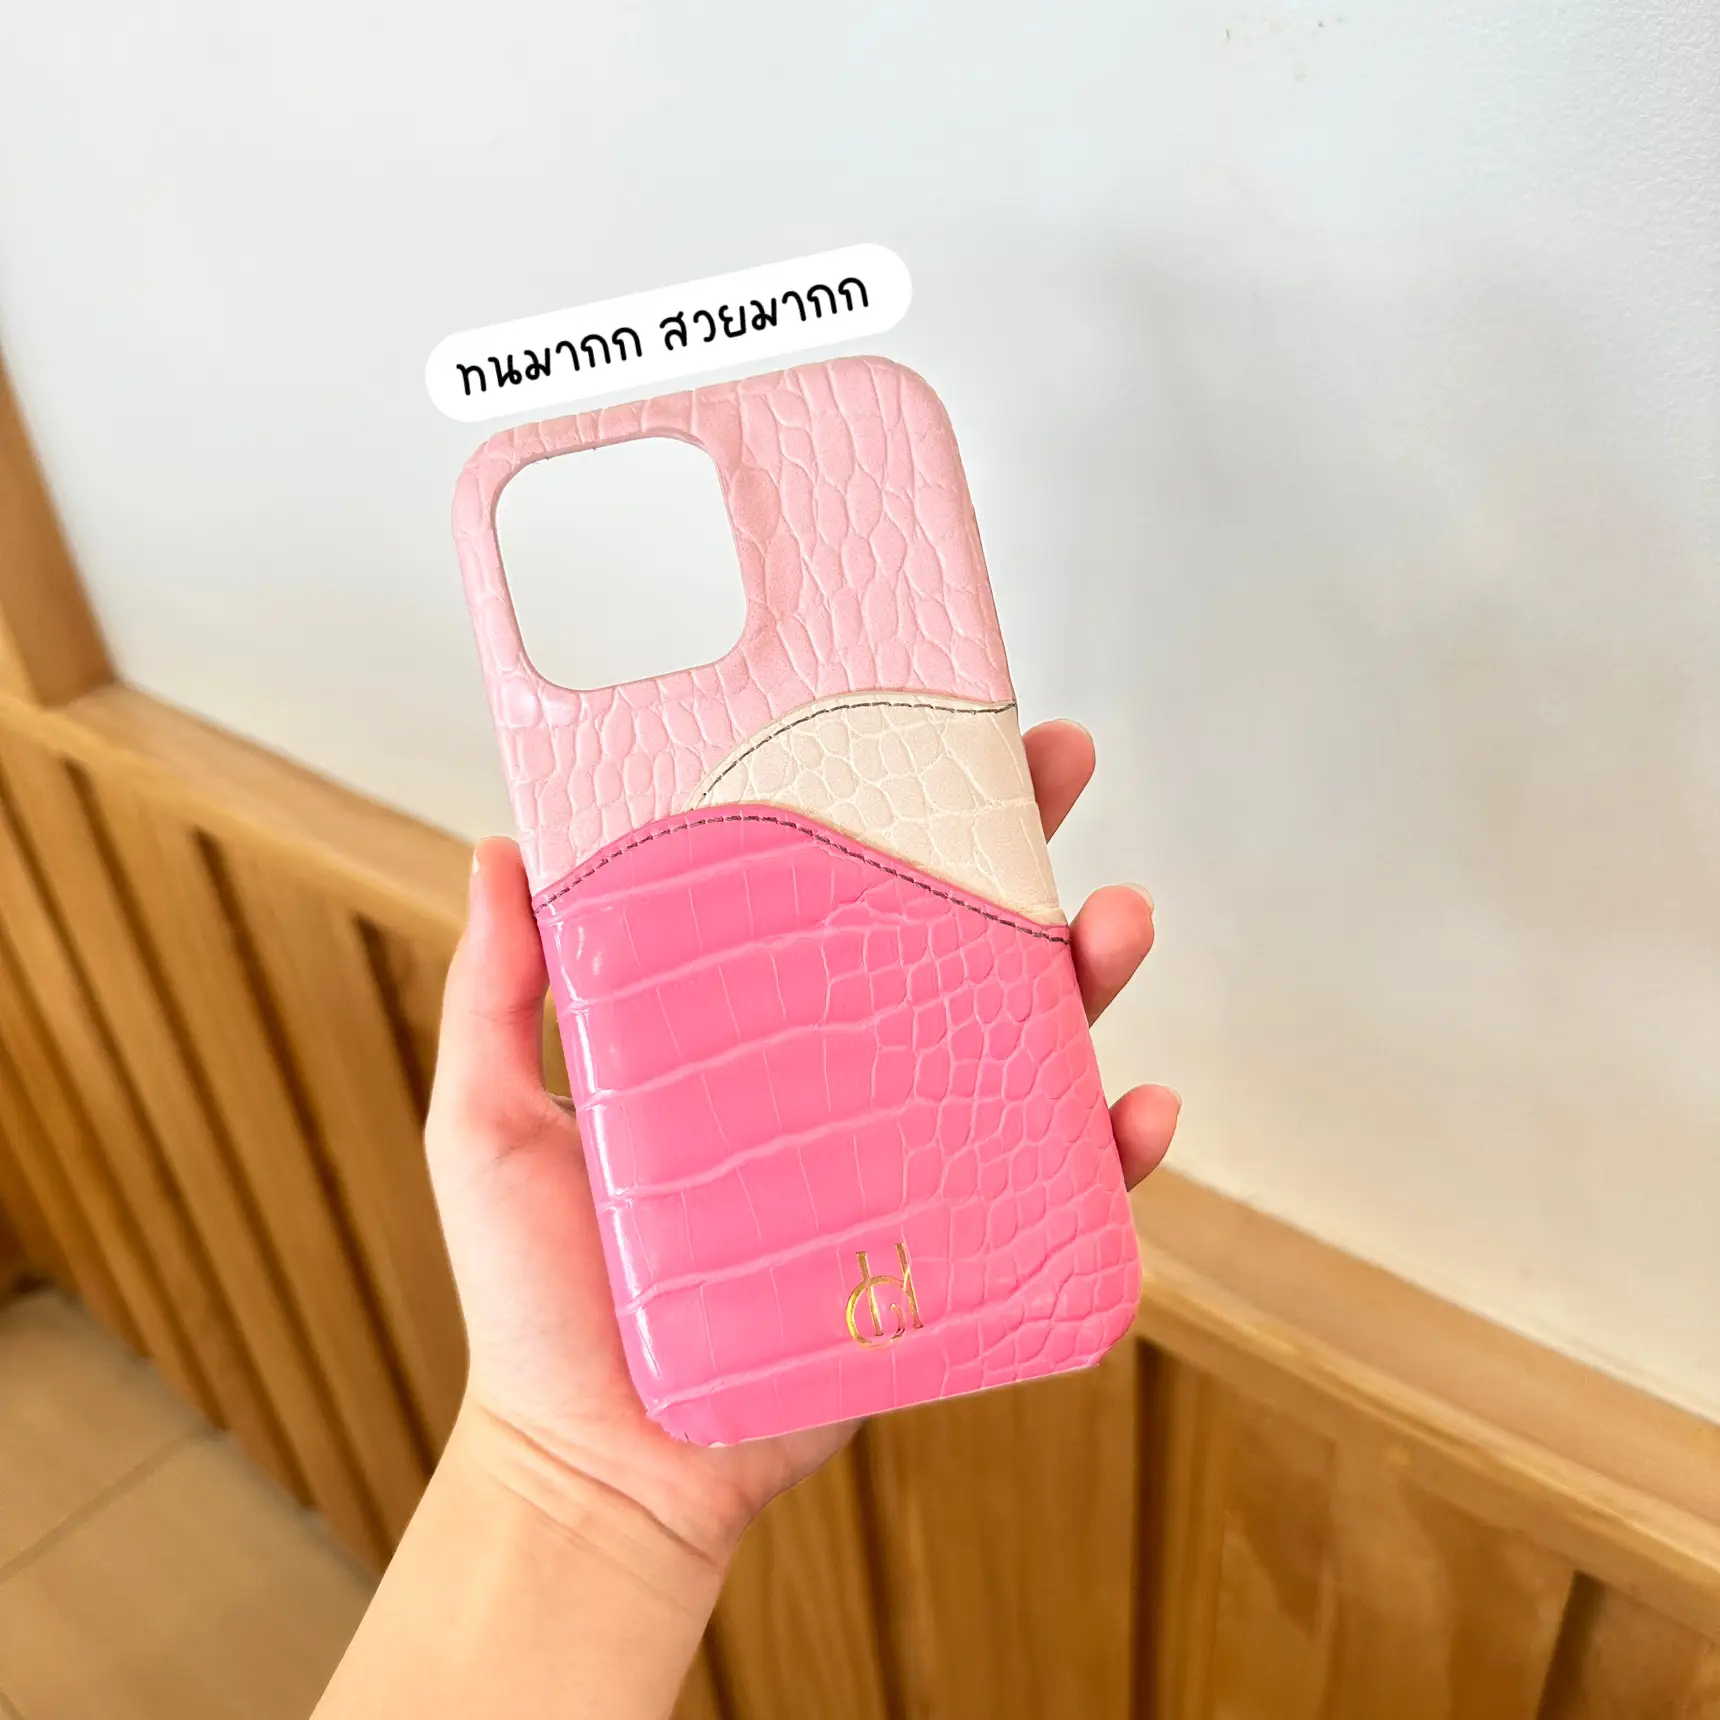 The iPhone 14 pro max case review is so cute ~, Gallery posted by ssompns